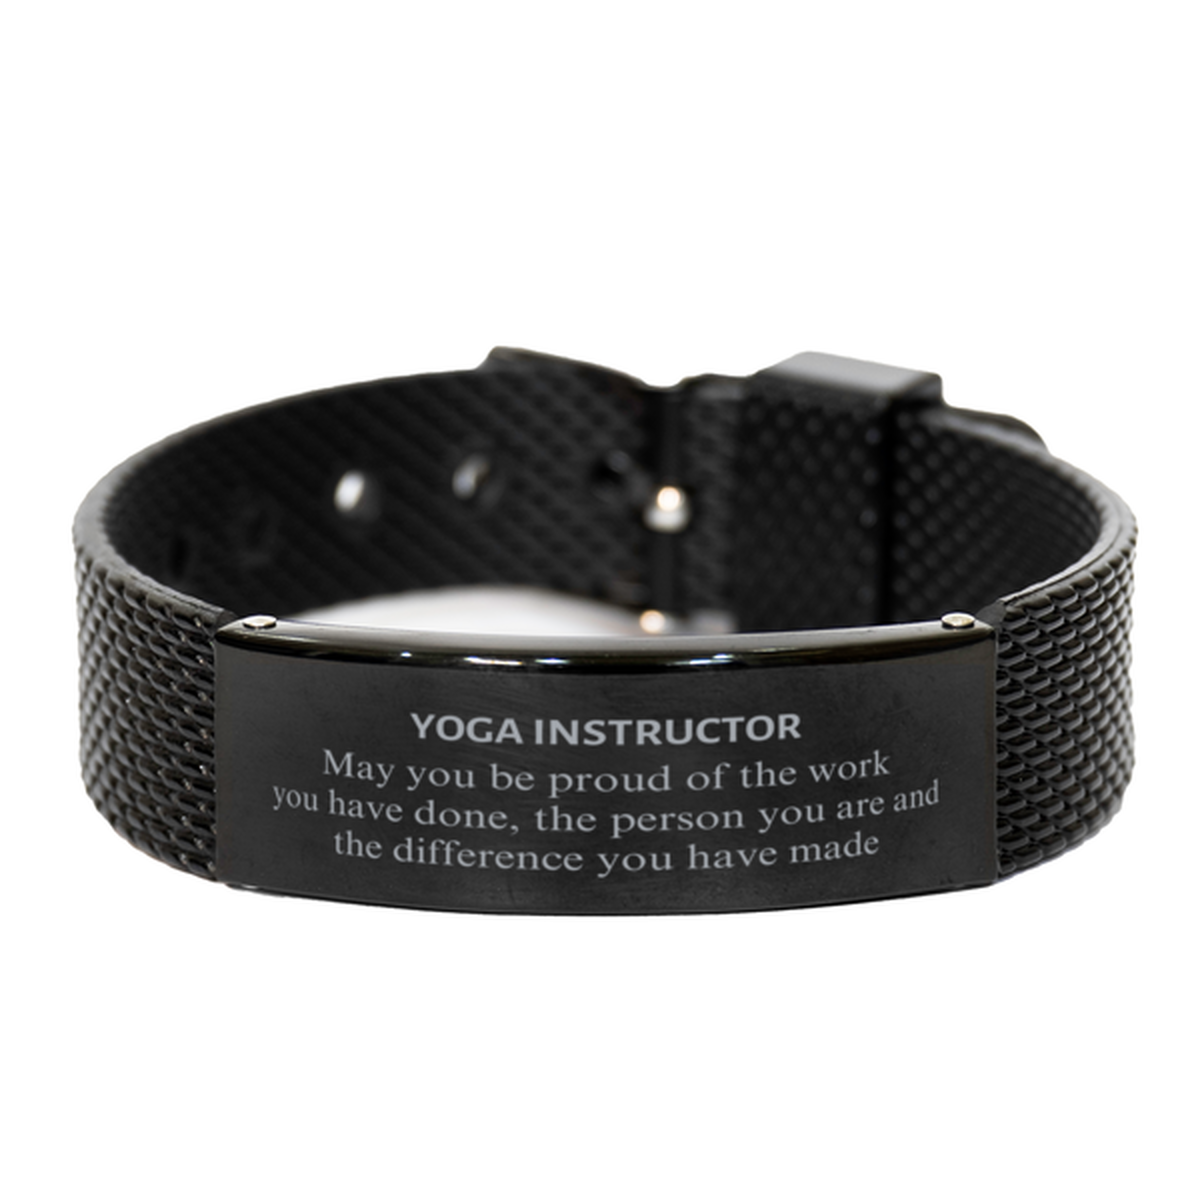 Yoga Instructor May you be proud of the work you have done, Retirement Yoga Instructor Black Shark Mesh Bracelet for Colleague Appreciation Gifts Amazing for Yoga Instructor